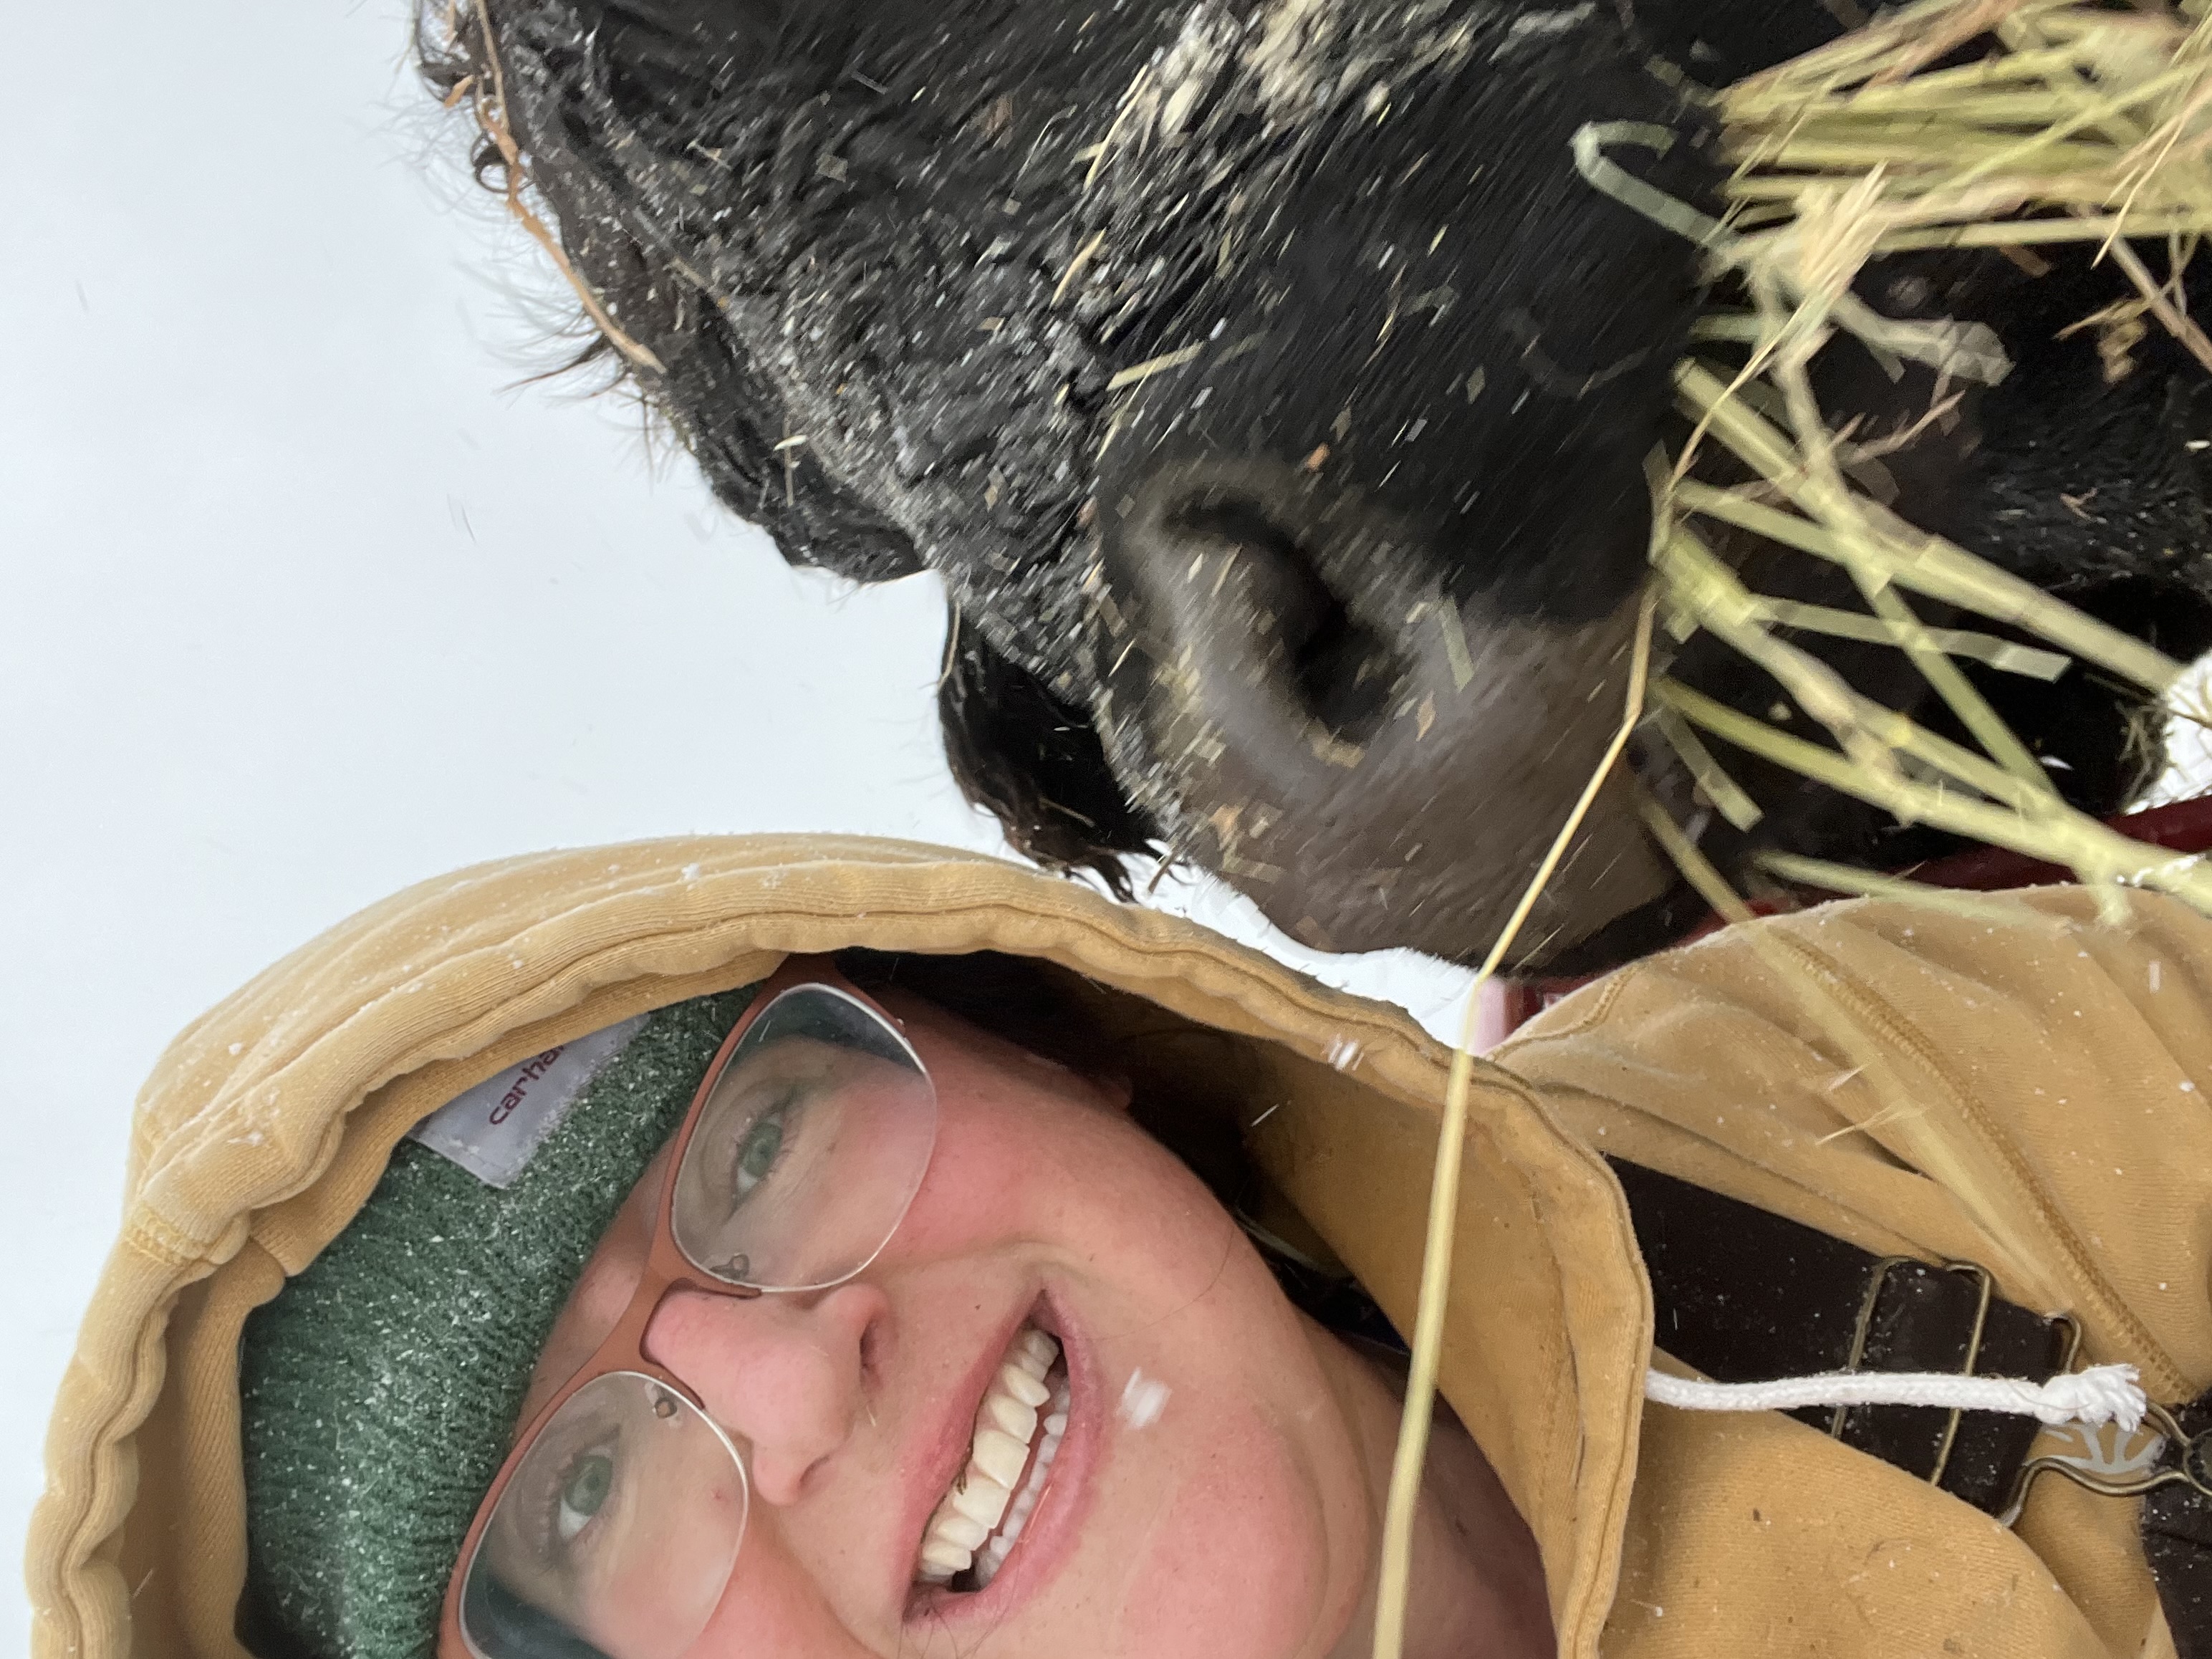 Kat Jacques wearing a yellow hoodie, a green beanie, and glasses with one of Waishkey Bay Farm's black cows in the photo chewing some hay.